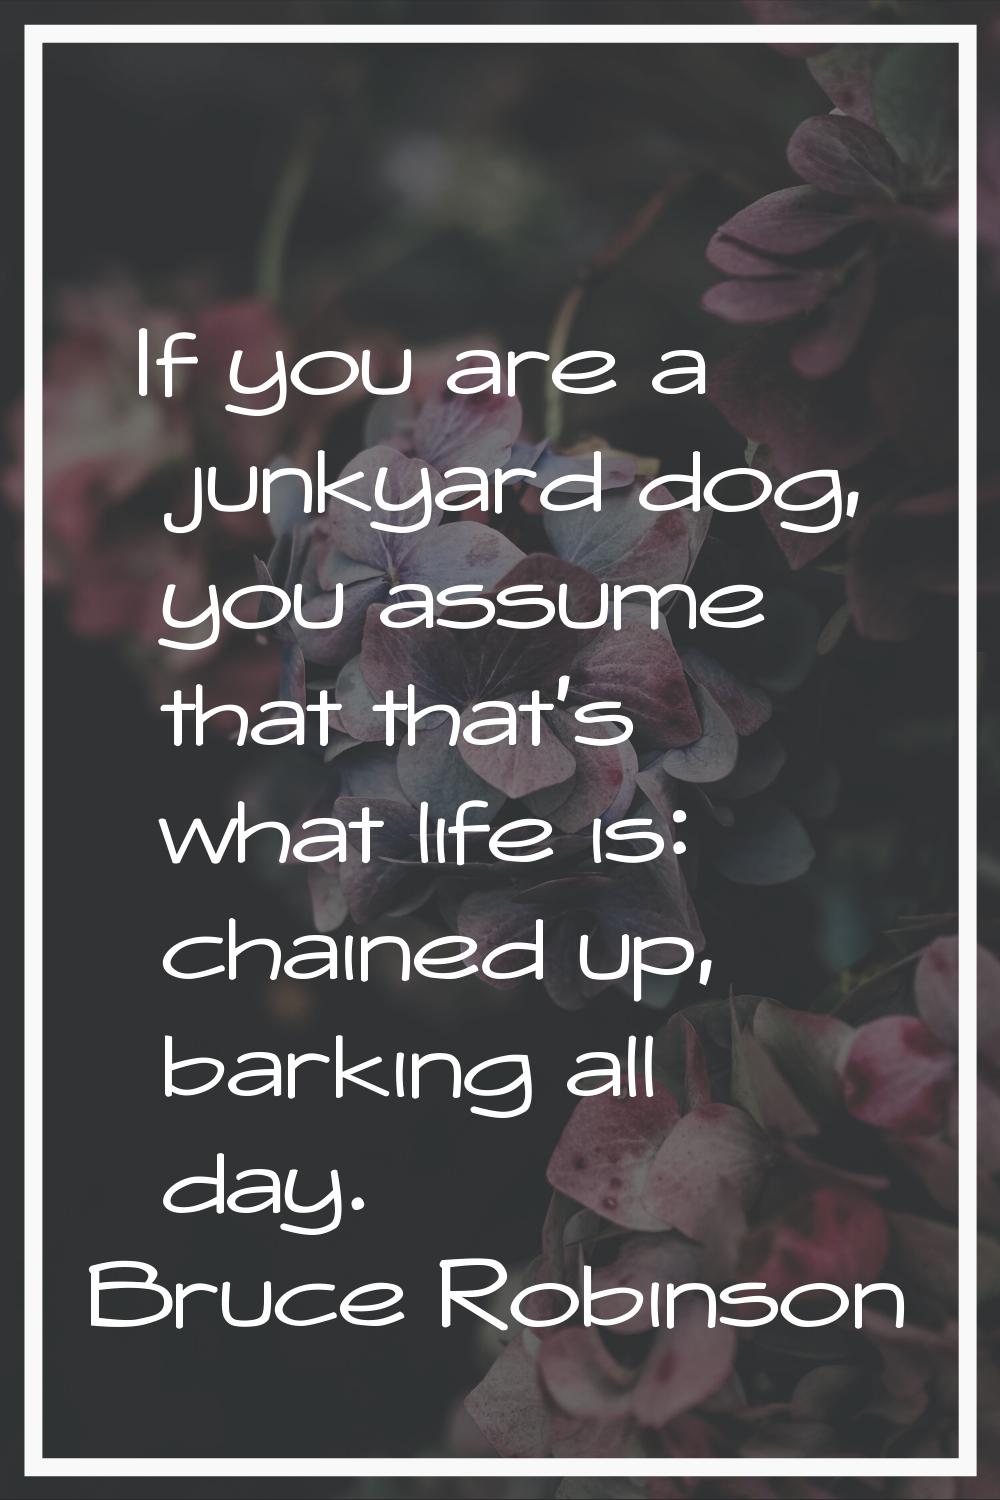 If you are a junkyard dog, you assume that that's what life is: chained up, barking all day.